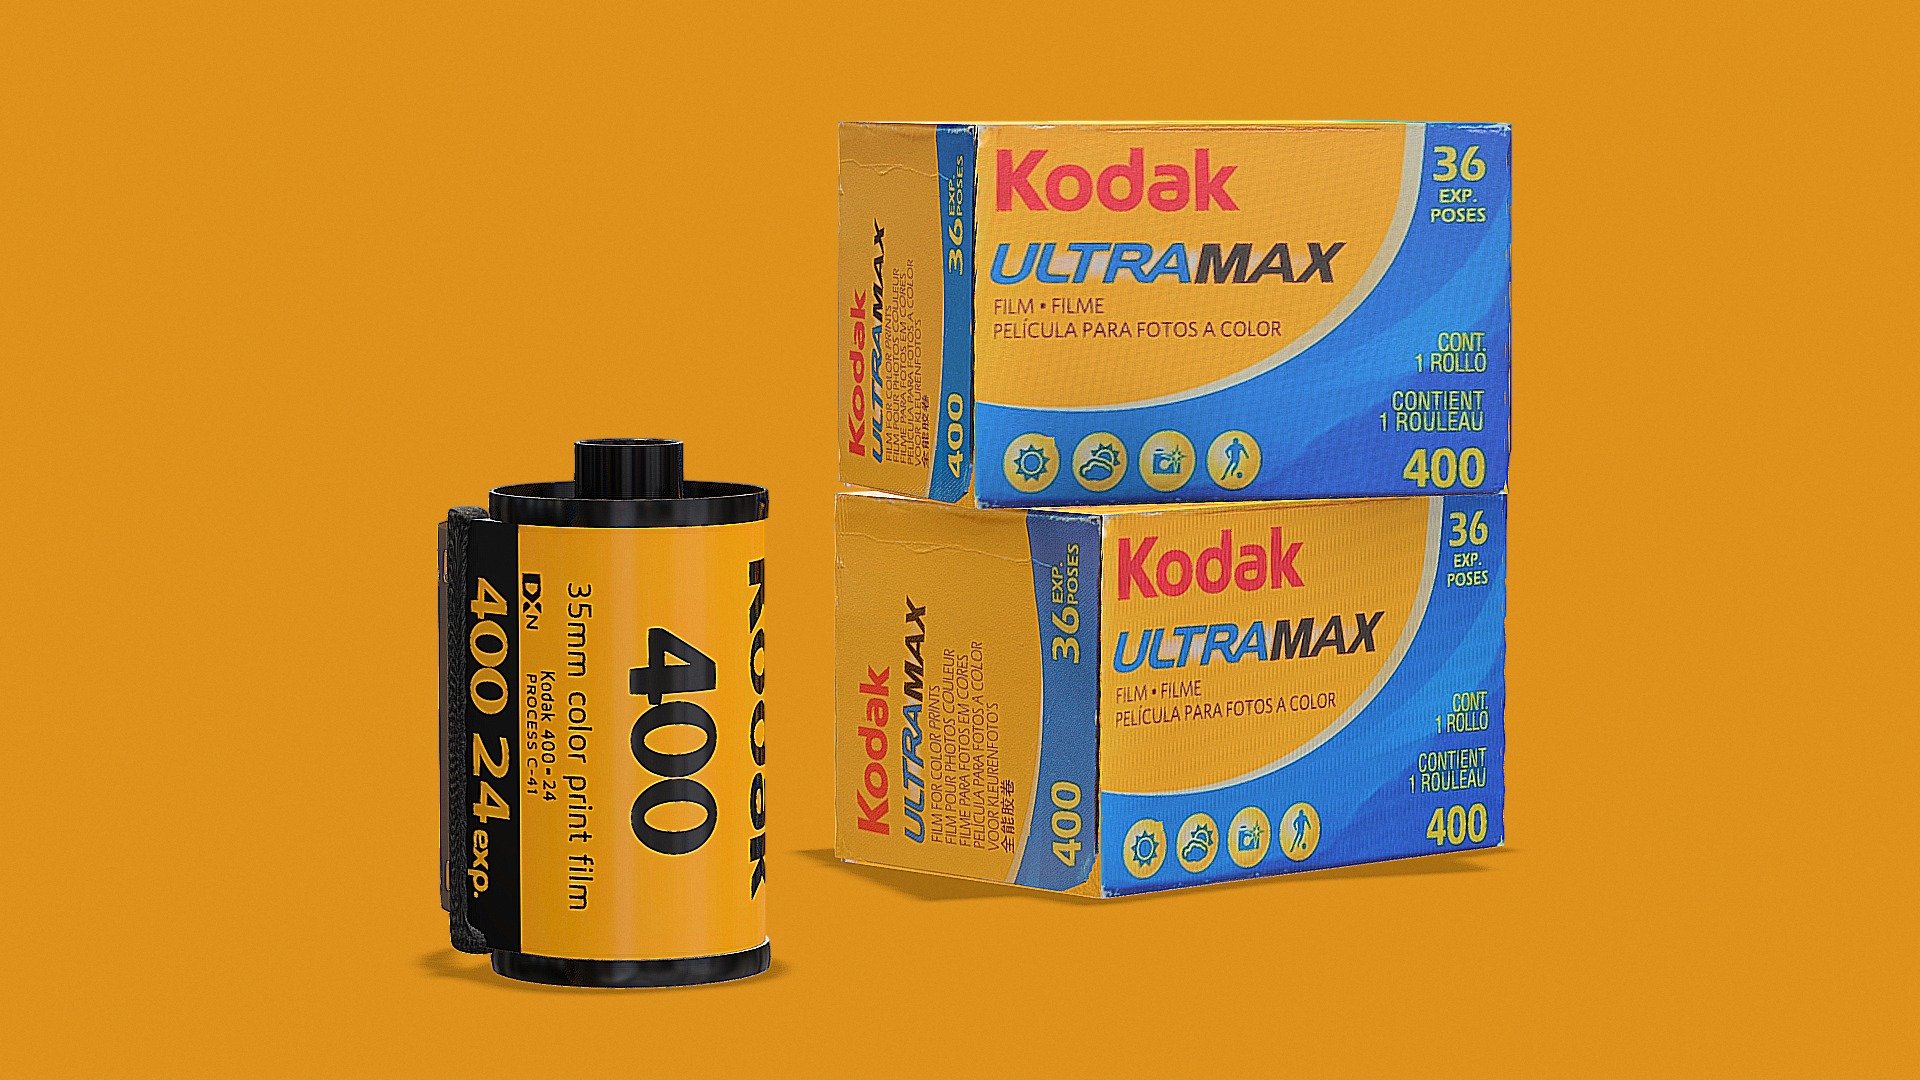 35mm kodak ultramax 400

Film roll and box made in blender, textured with substance painter/photoshop
My patreon if you want to donate and support me (you will also get exclusive assets): https://www.patreon.com/user?u=82064625&amp;fan_landing=true&amp;view_as=public - Kodak Ultramax 400 film roll - Buy Royalty Free 3D model by Kenkento3D (@kenkento.zapater) 3d model